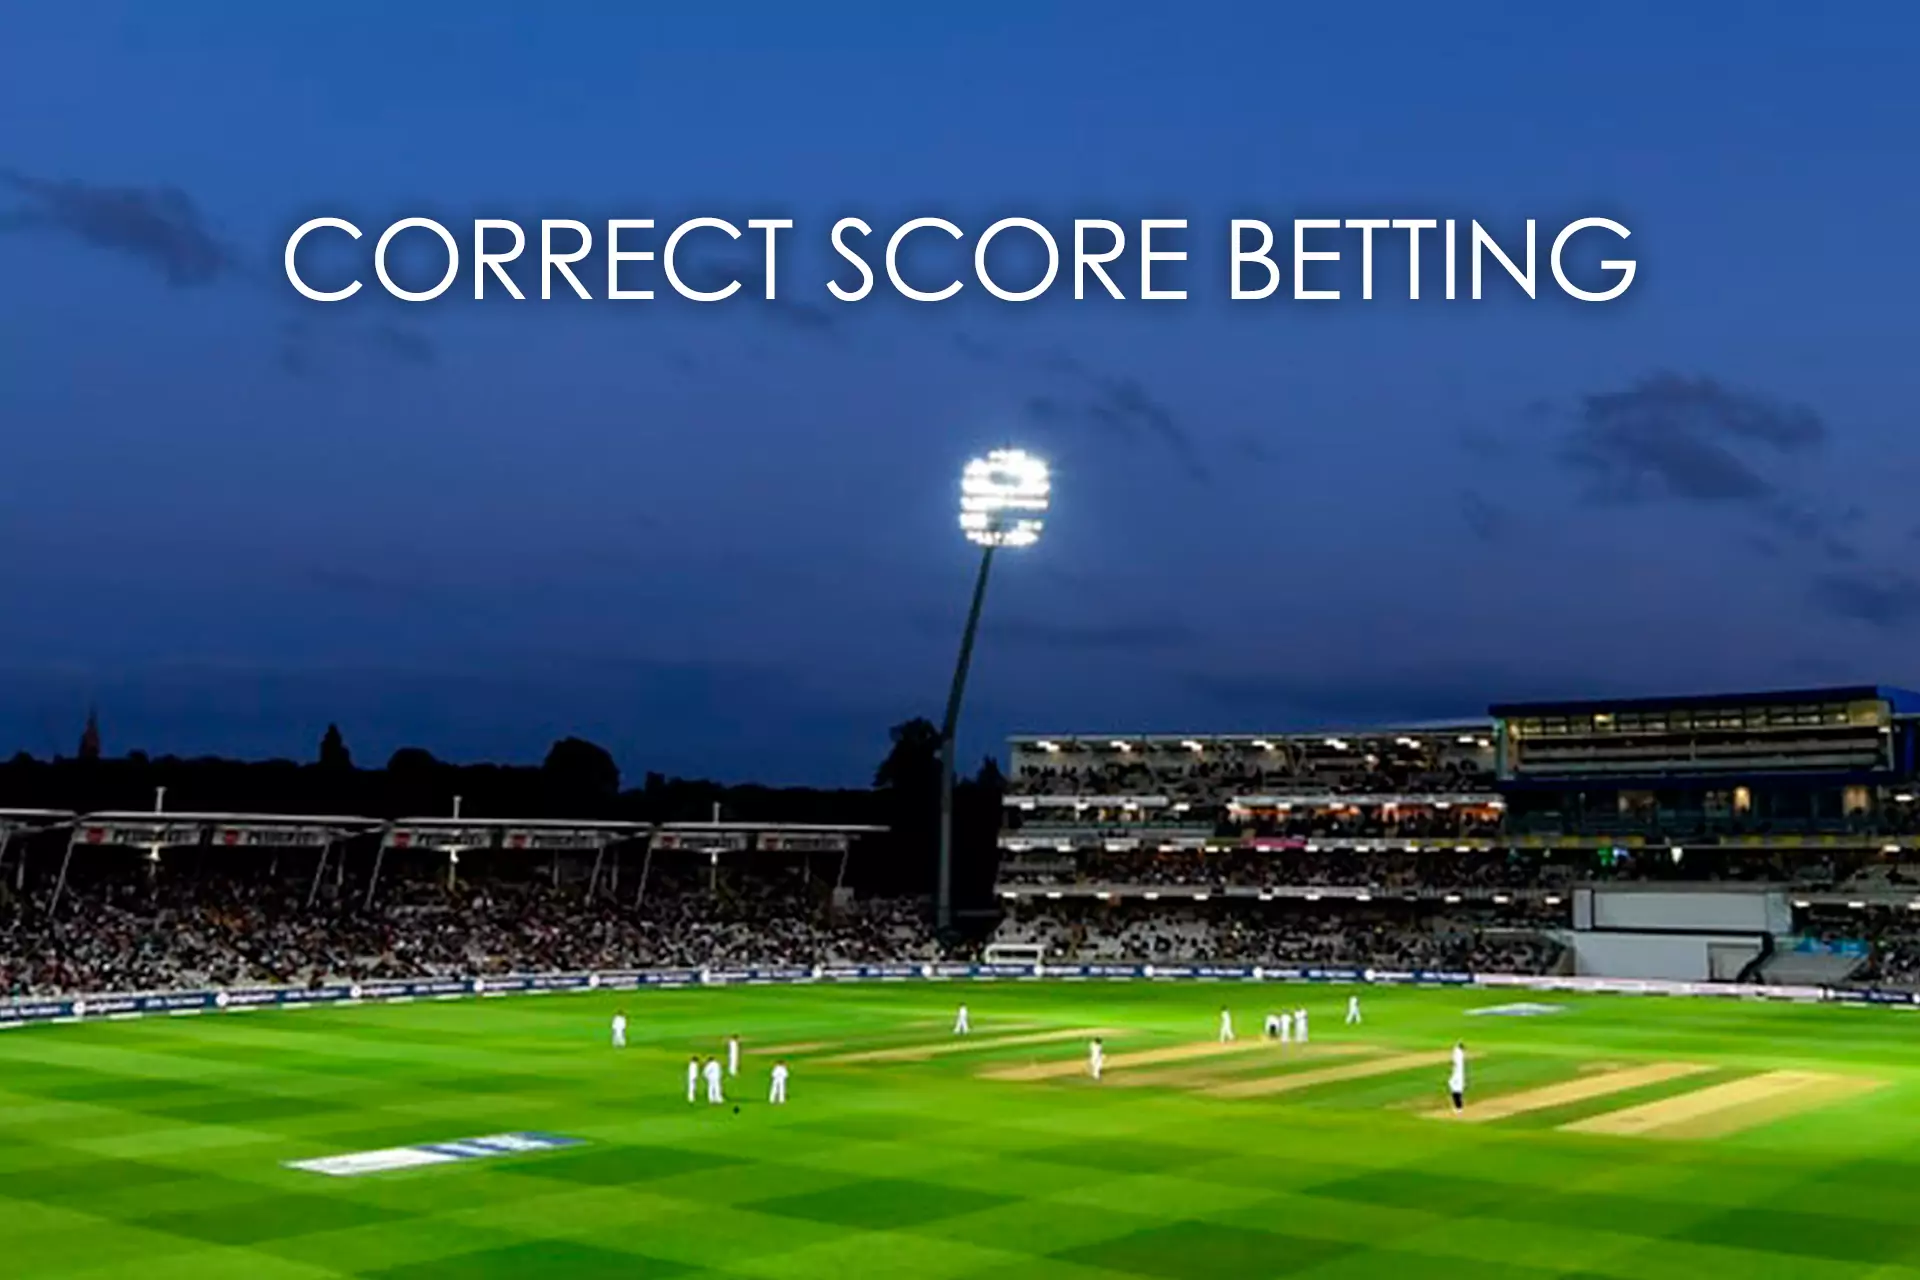 The Correct Score Strategy is the simplest and most effective way to place bets with the highest profit.